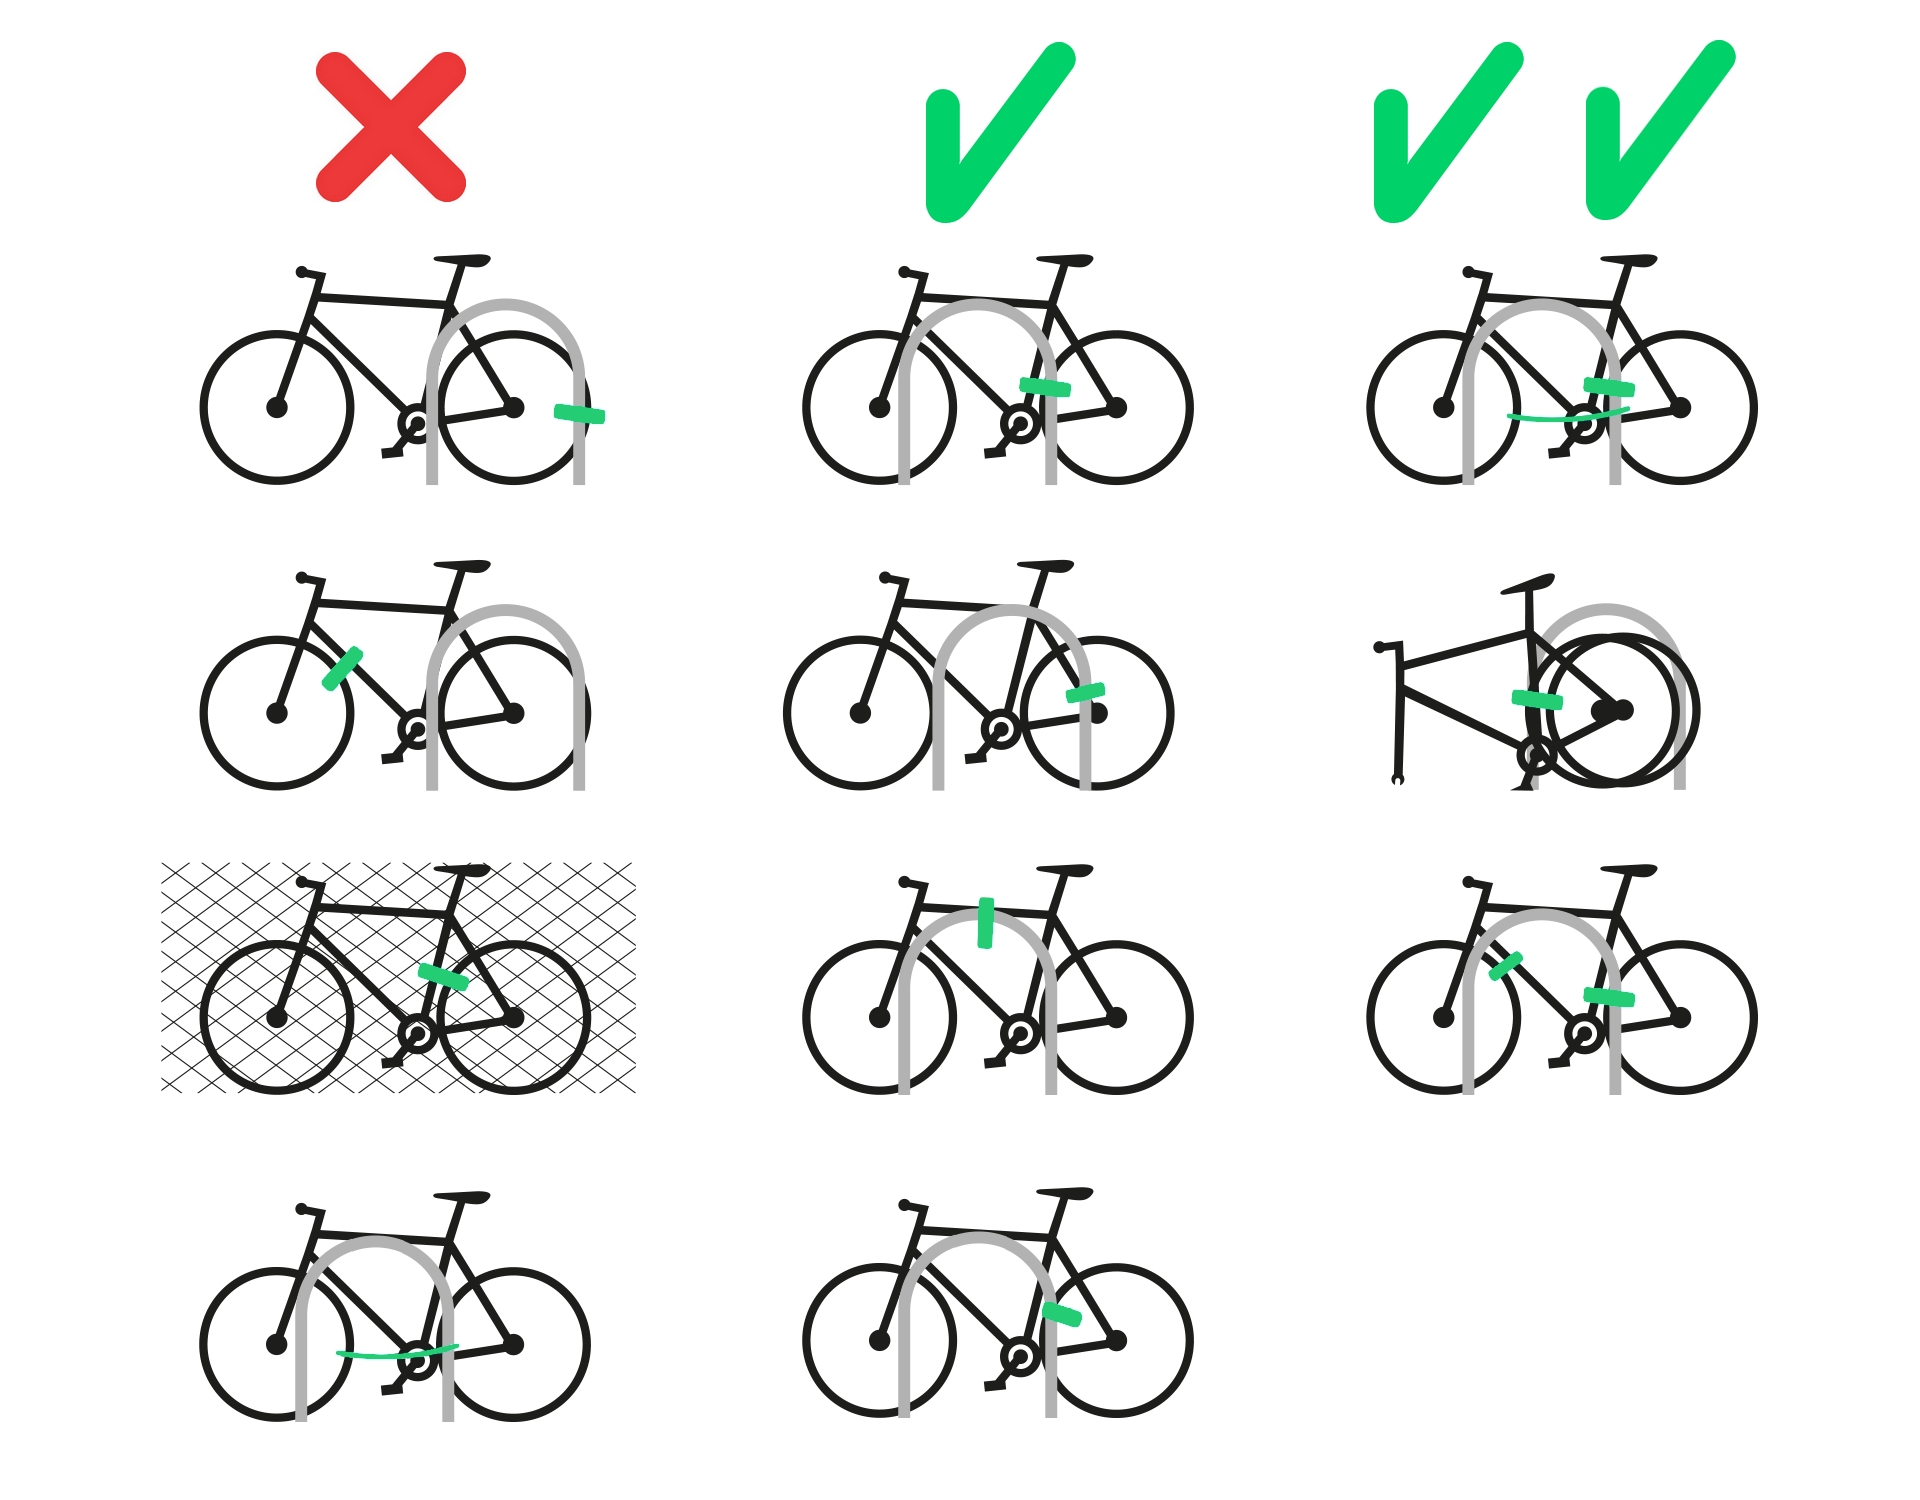 Examples of how and where lock your bike